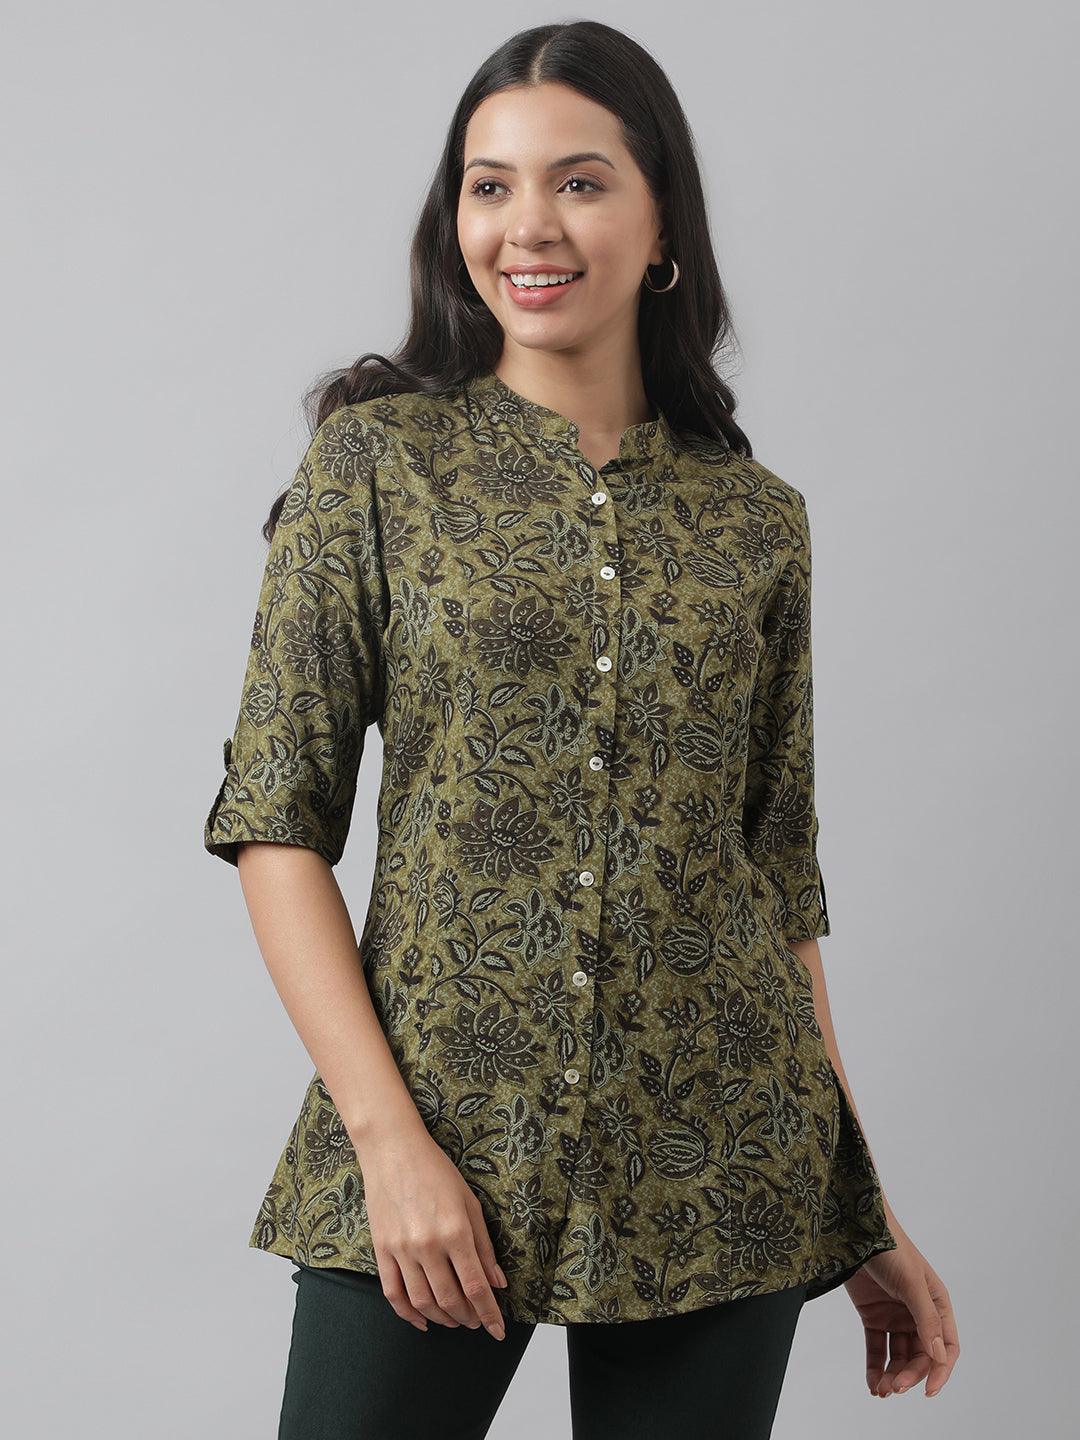 Divena Olive Green Floral Printed Rayon A-line Shirt Style Top - divena world